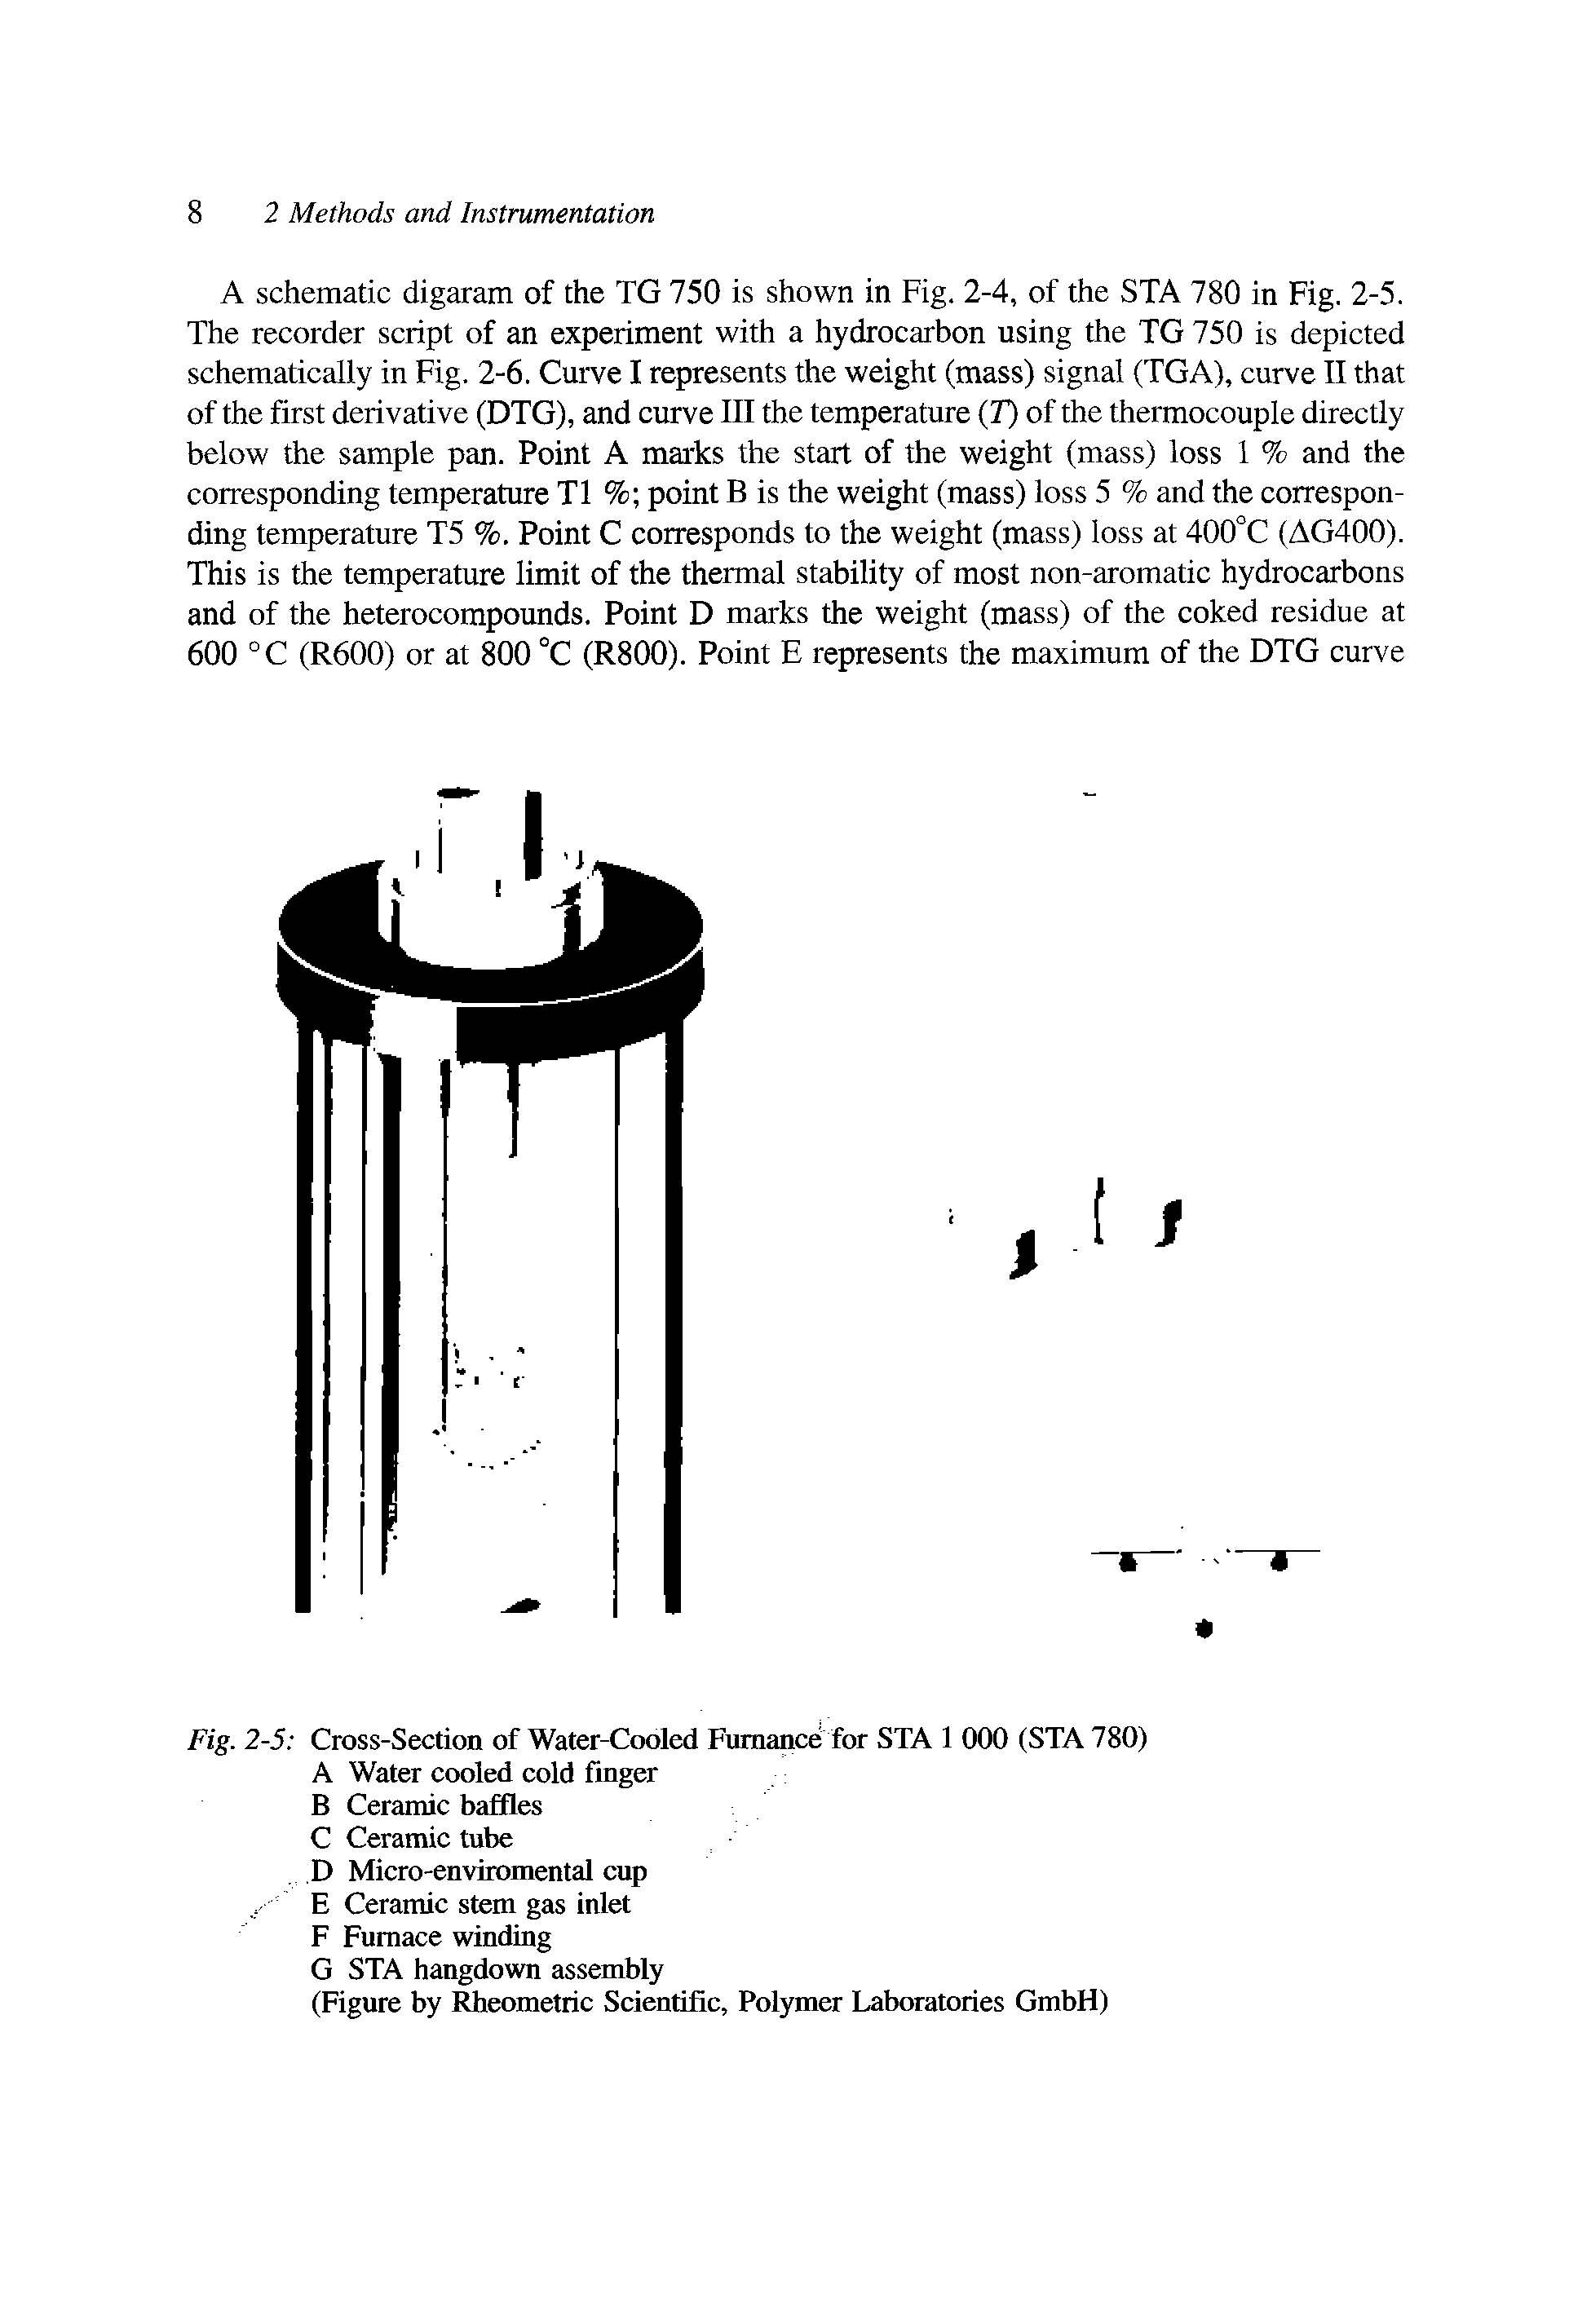 Fig. 2-5 Cross-Section of Water-Cooled Fumance for STA 1 000 (STA 780) A Water cooled cold finger B Ceramic baffles C Ceramic tube D Micro-enviromental cup. . E Ceramic stem gas inlet F Furnace winding G STA hangdown assembly...